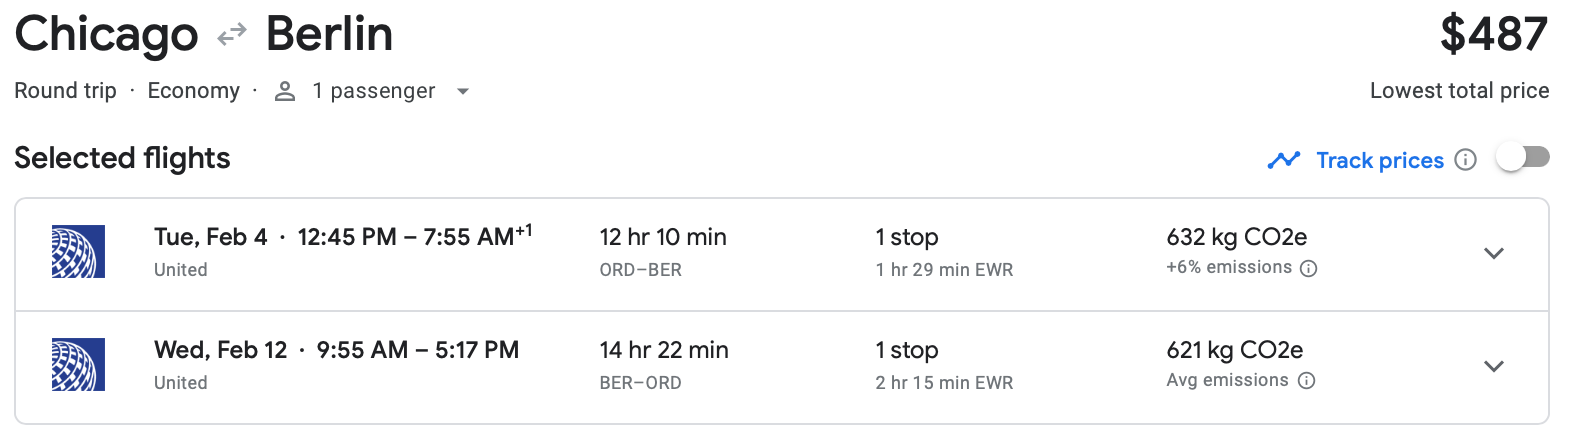 Google Flights estimate for roundtrip flight from Chicago to Berlin